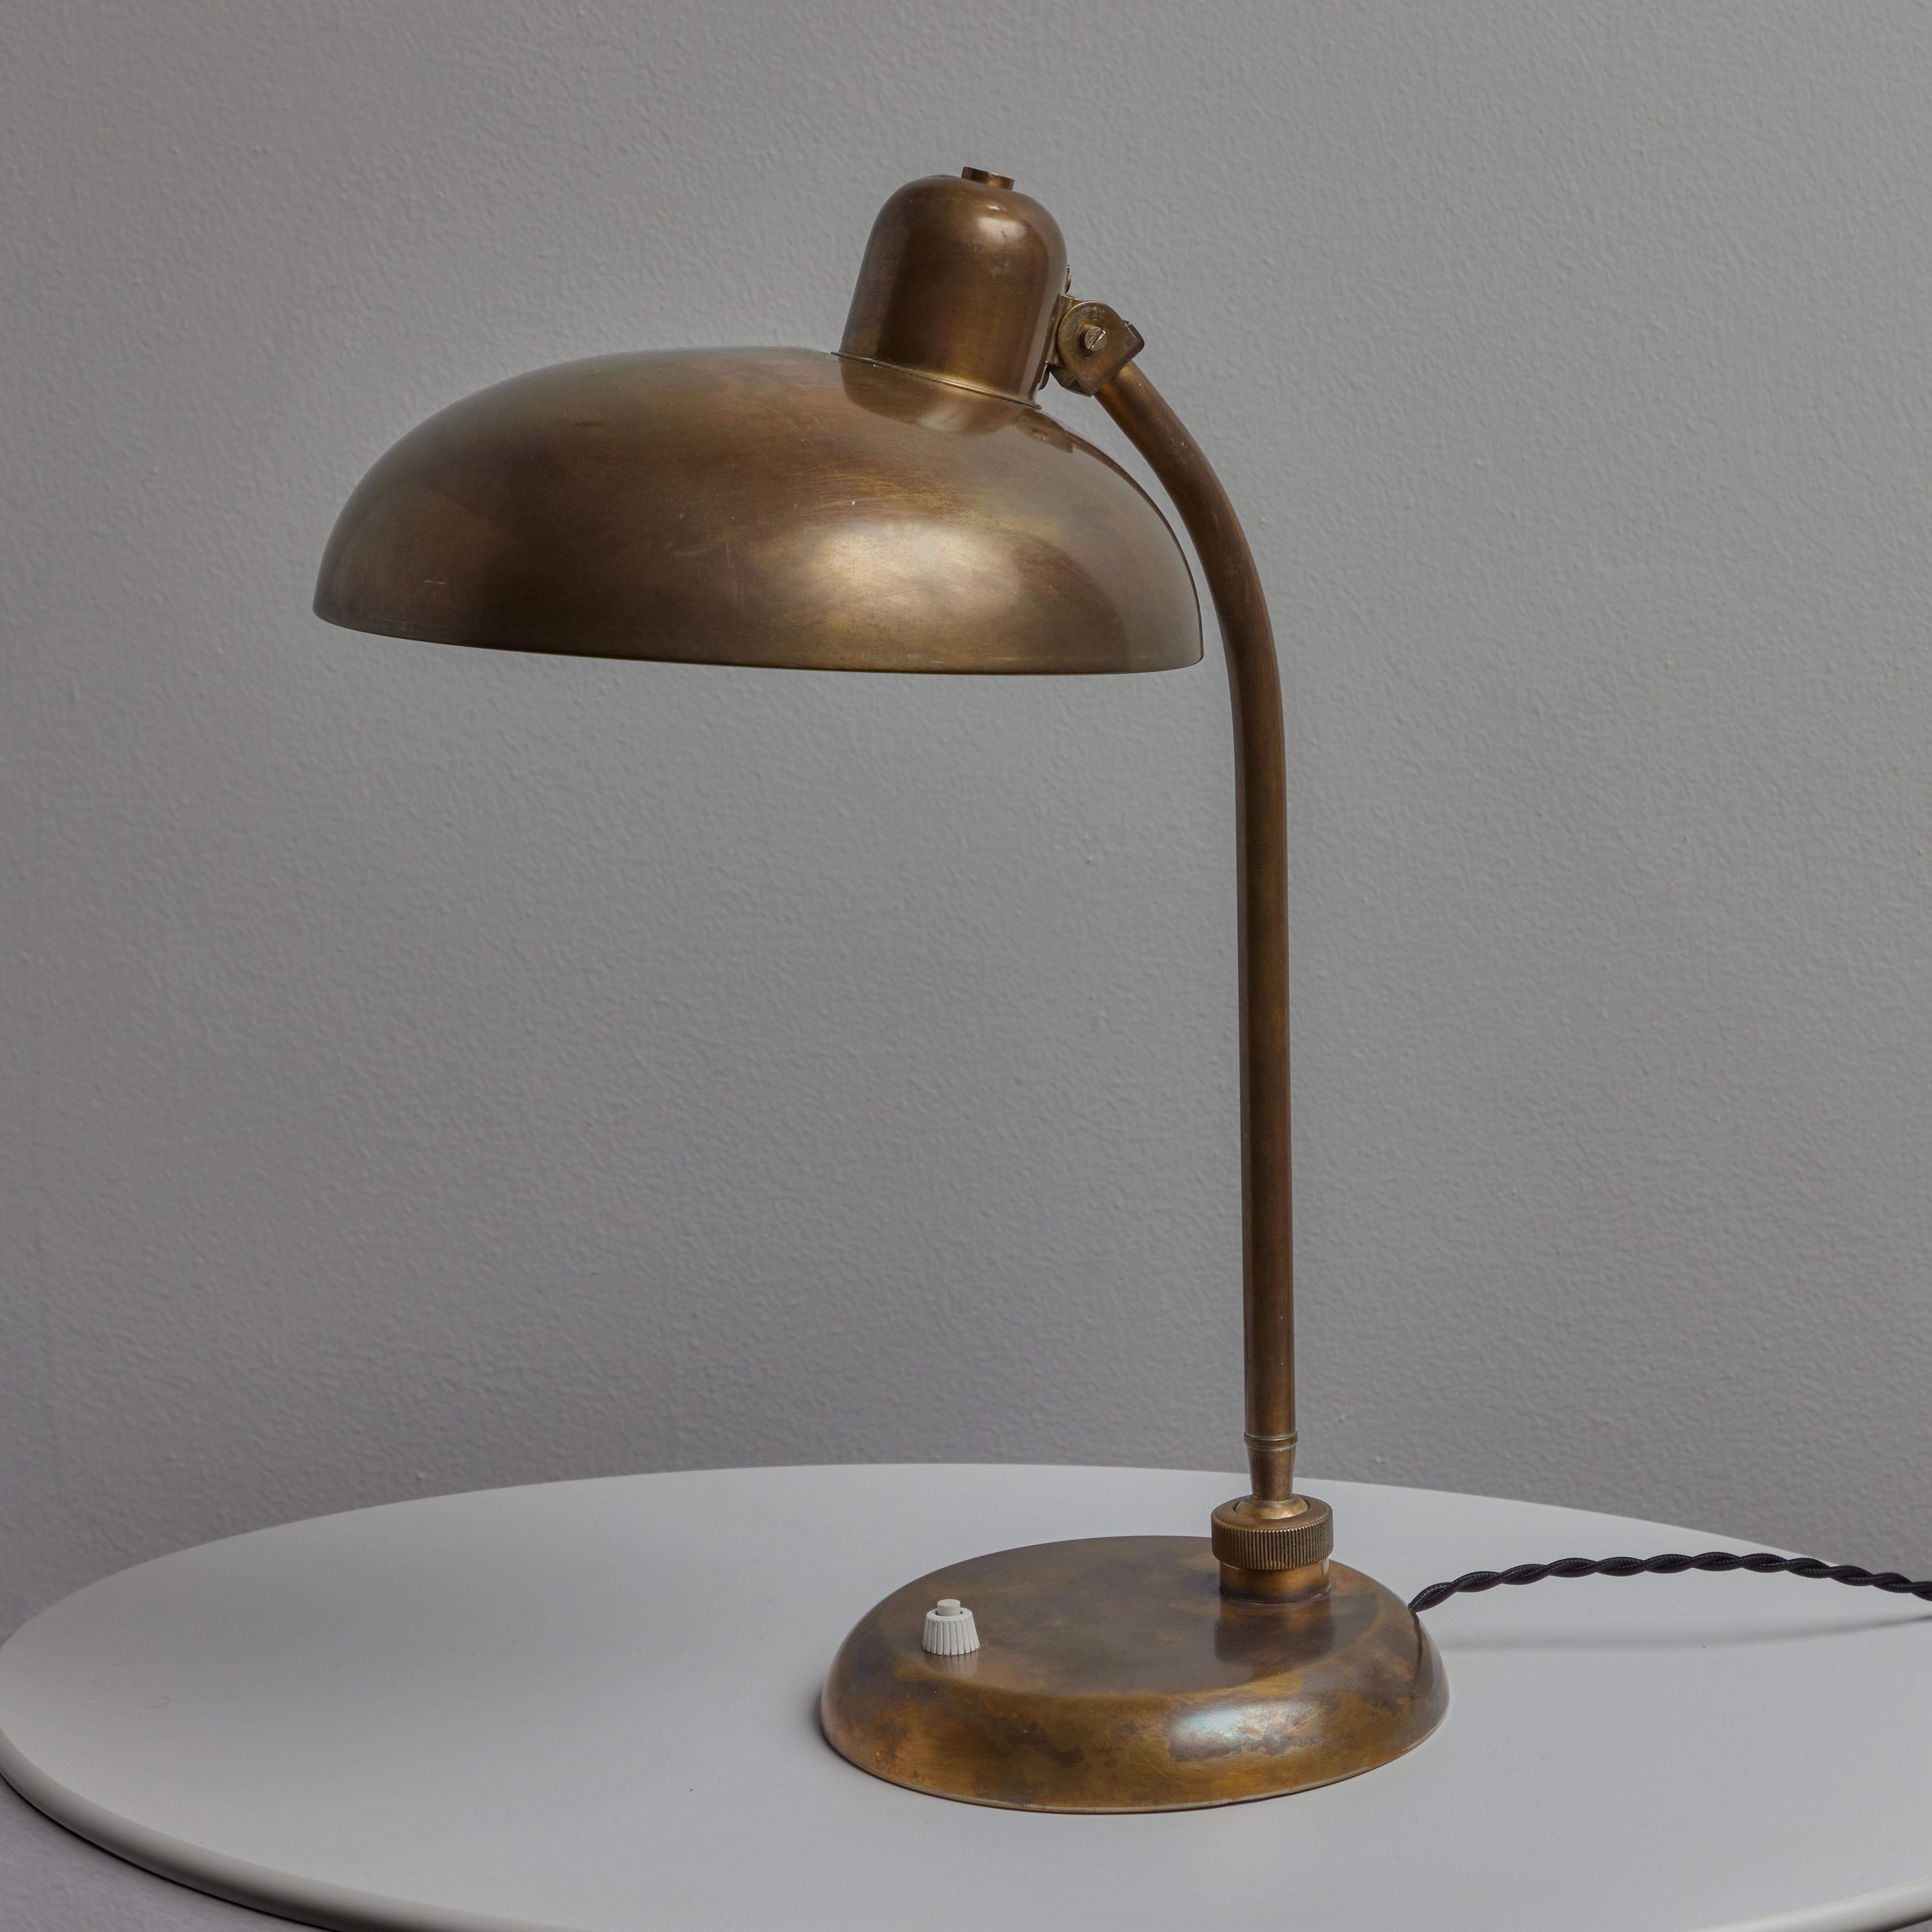 1940s Giovanni Michelucci Patinated Brass Ministerial Table Lamp for Lariolux For Sale 4